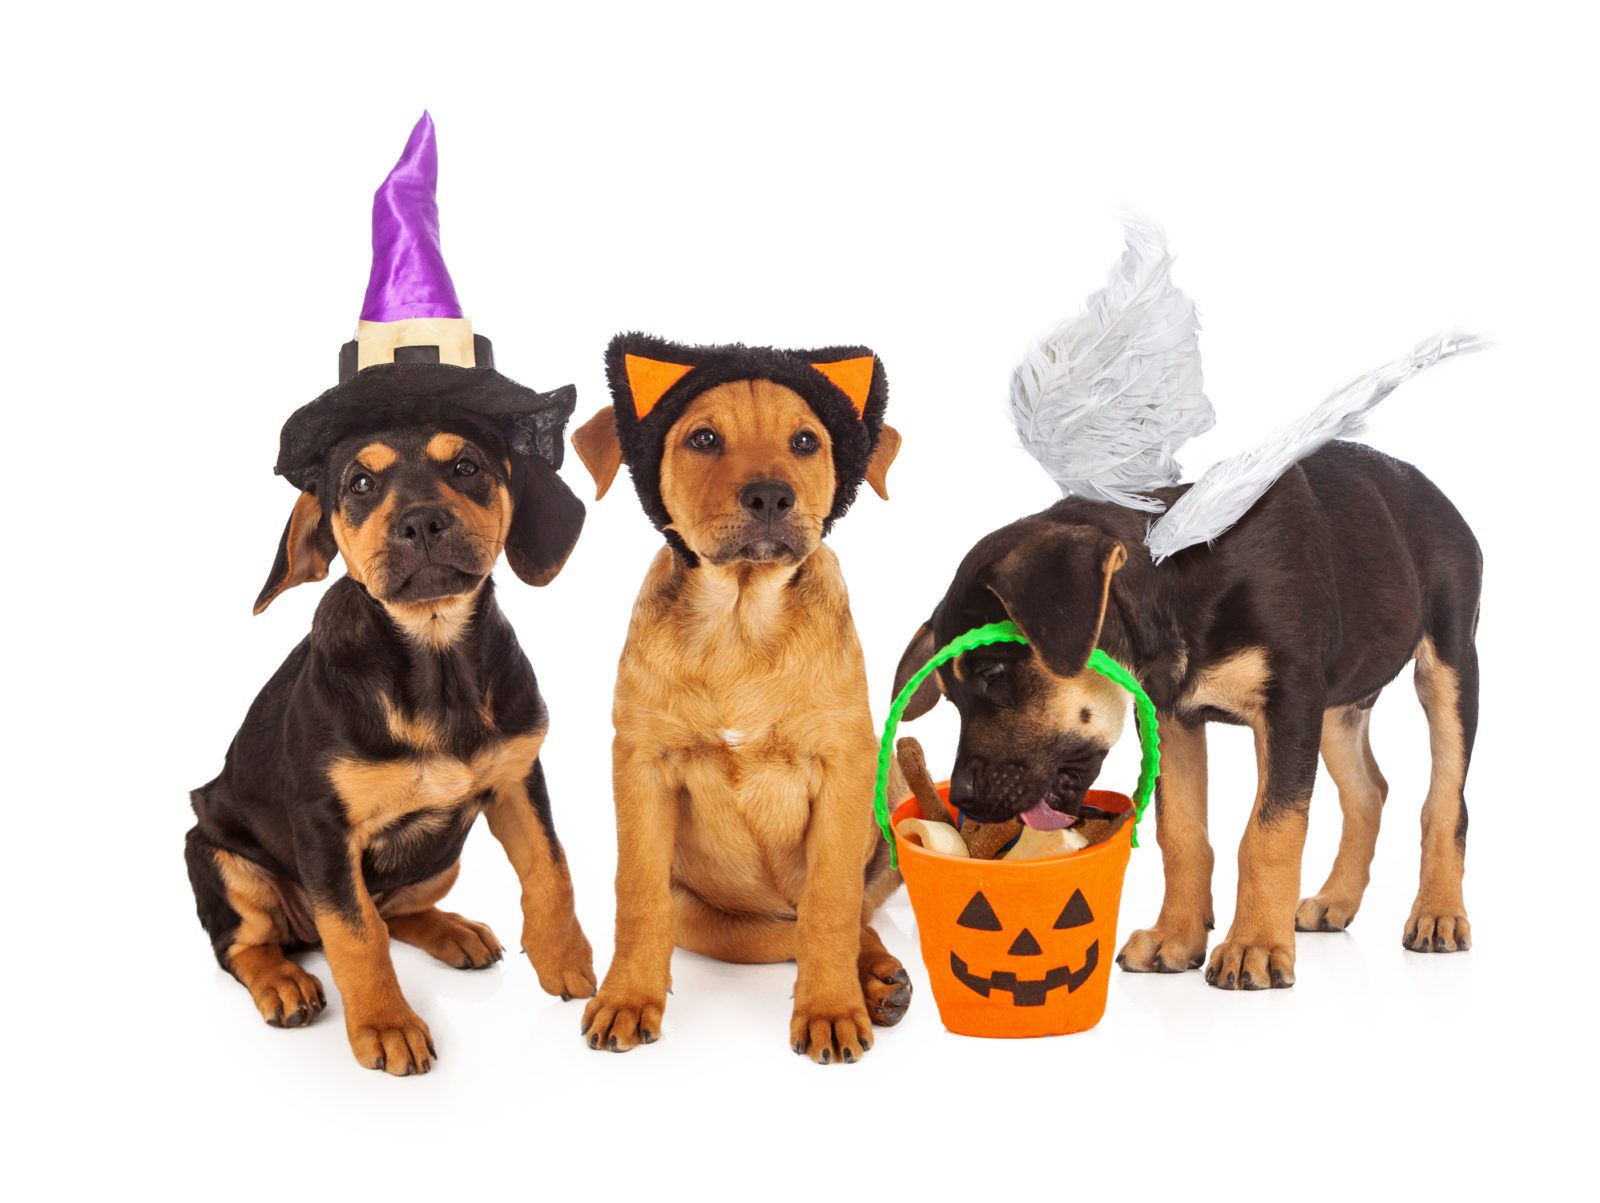 Puppies Dressed for Halloween